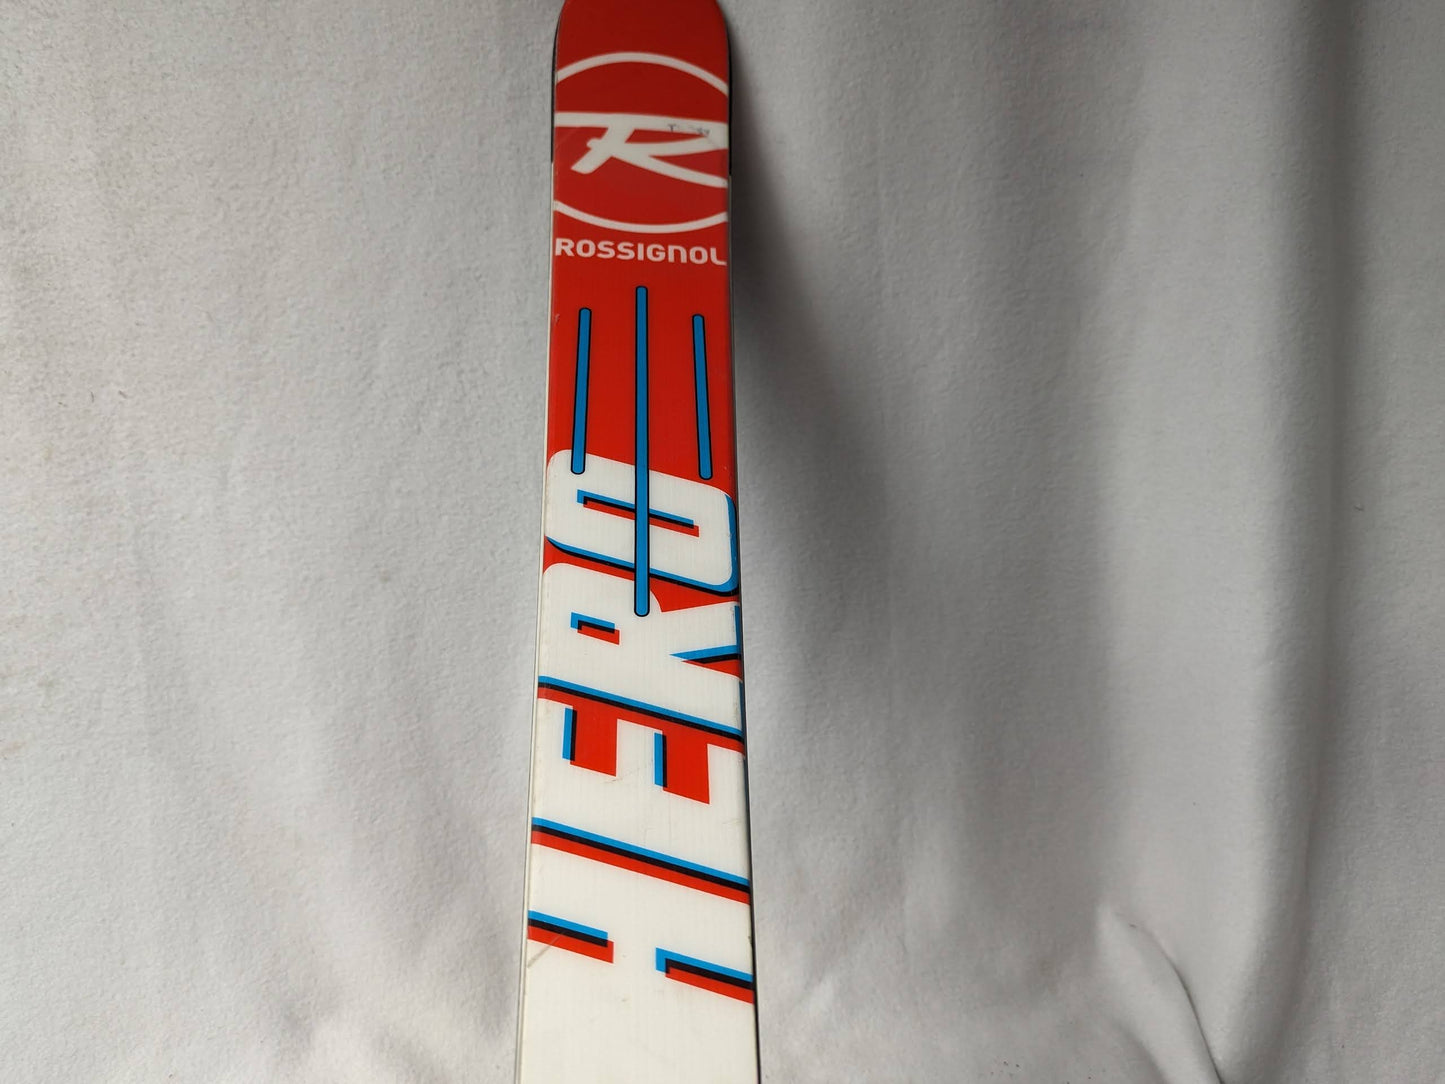 Rossignol Hero GS Pro Skis w/Look Bindings Size 151 Cm Color Orange Condition Used